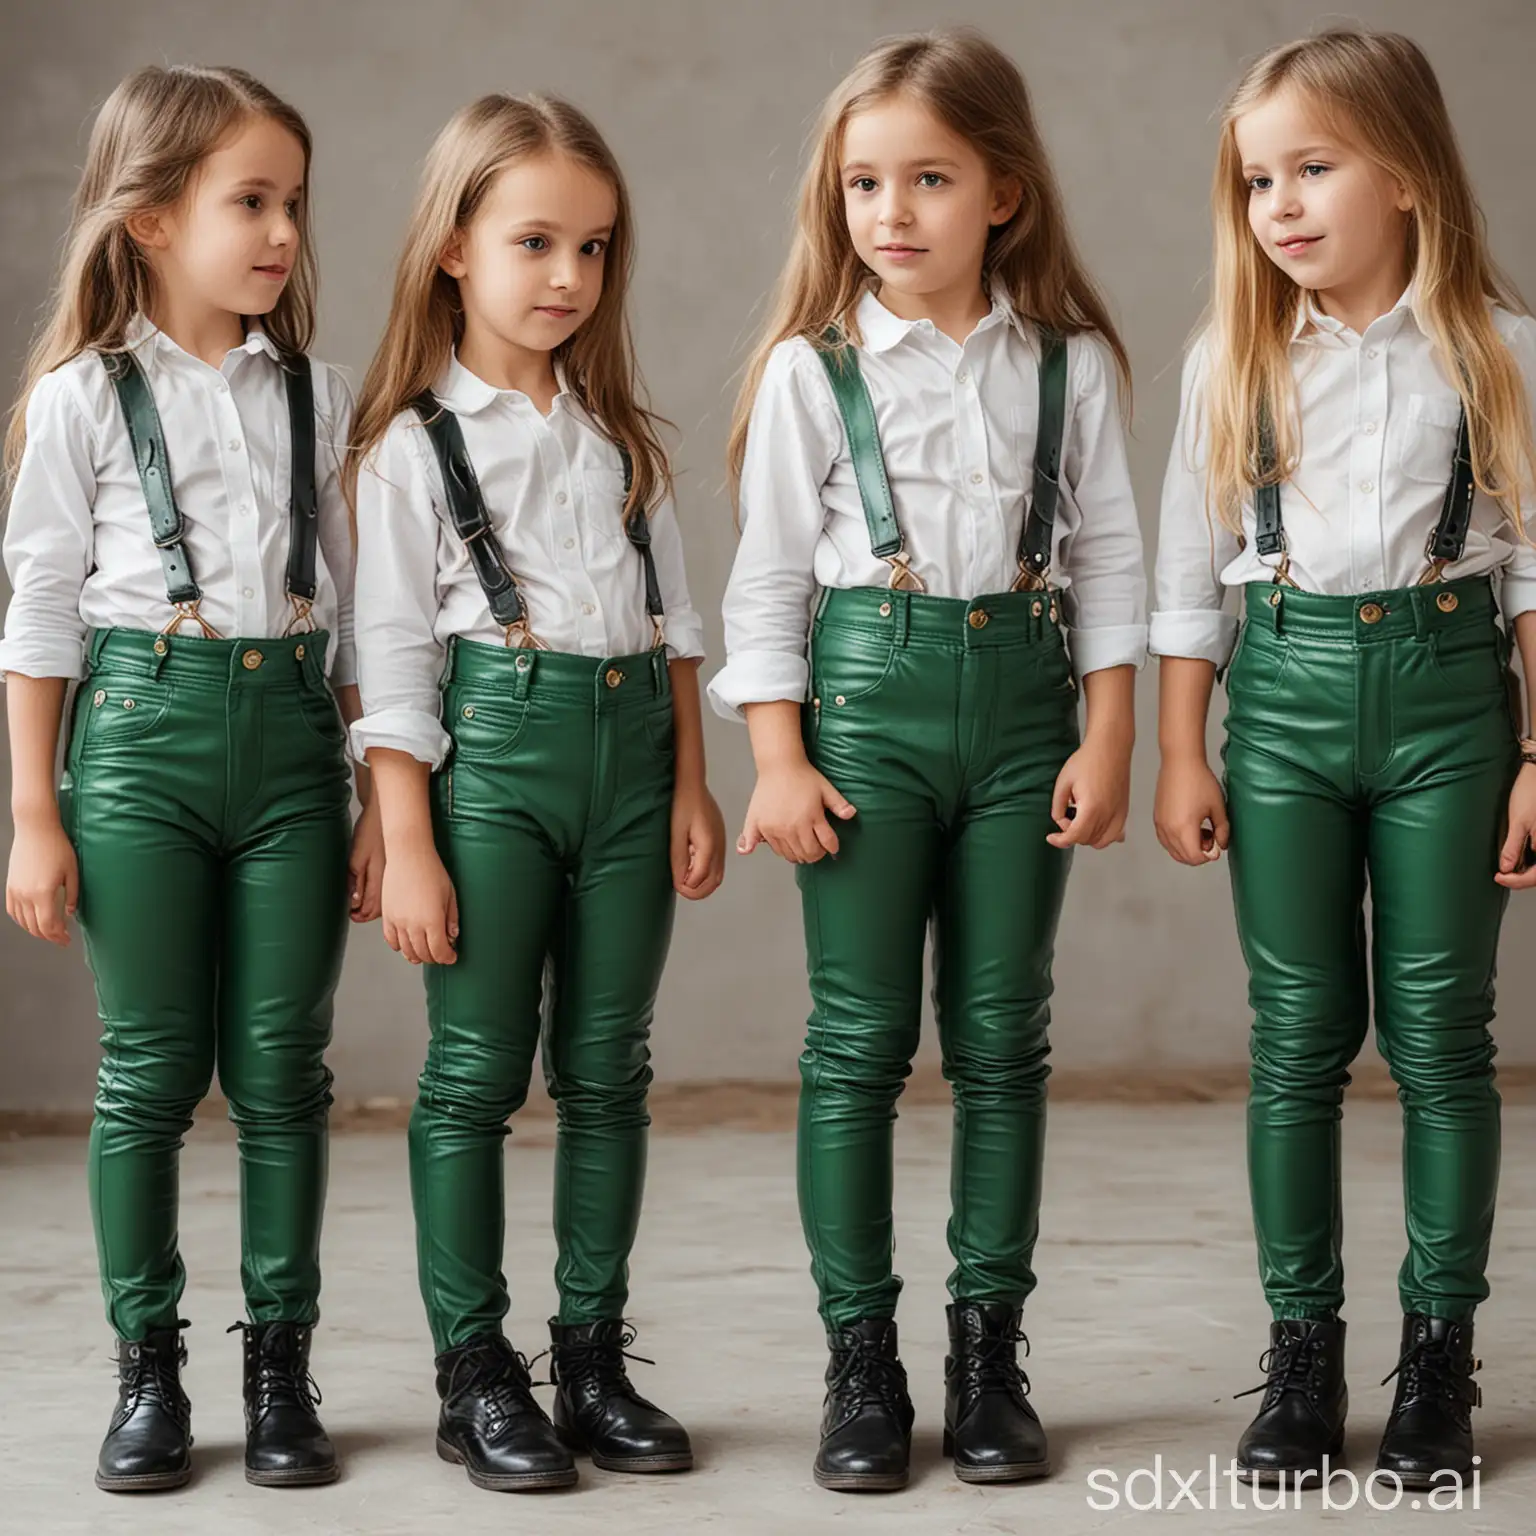 Playful-Girls-in-Stylish-Green-Leather-Pants